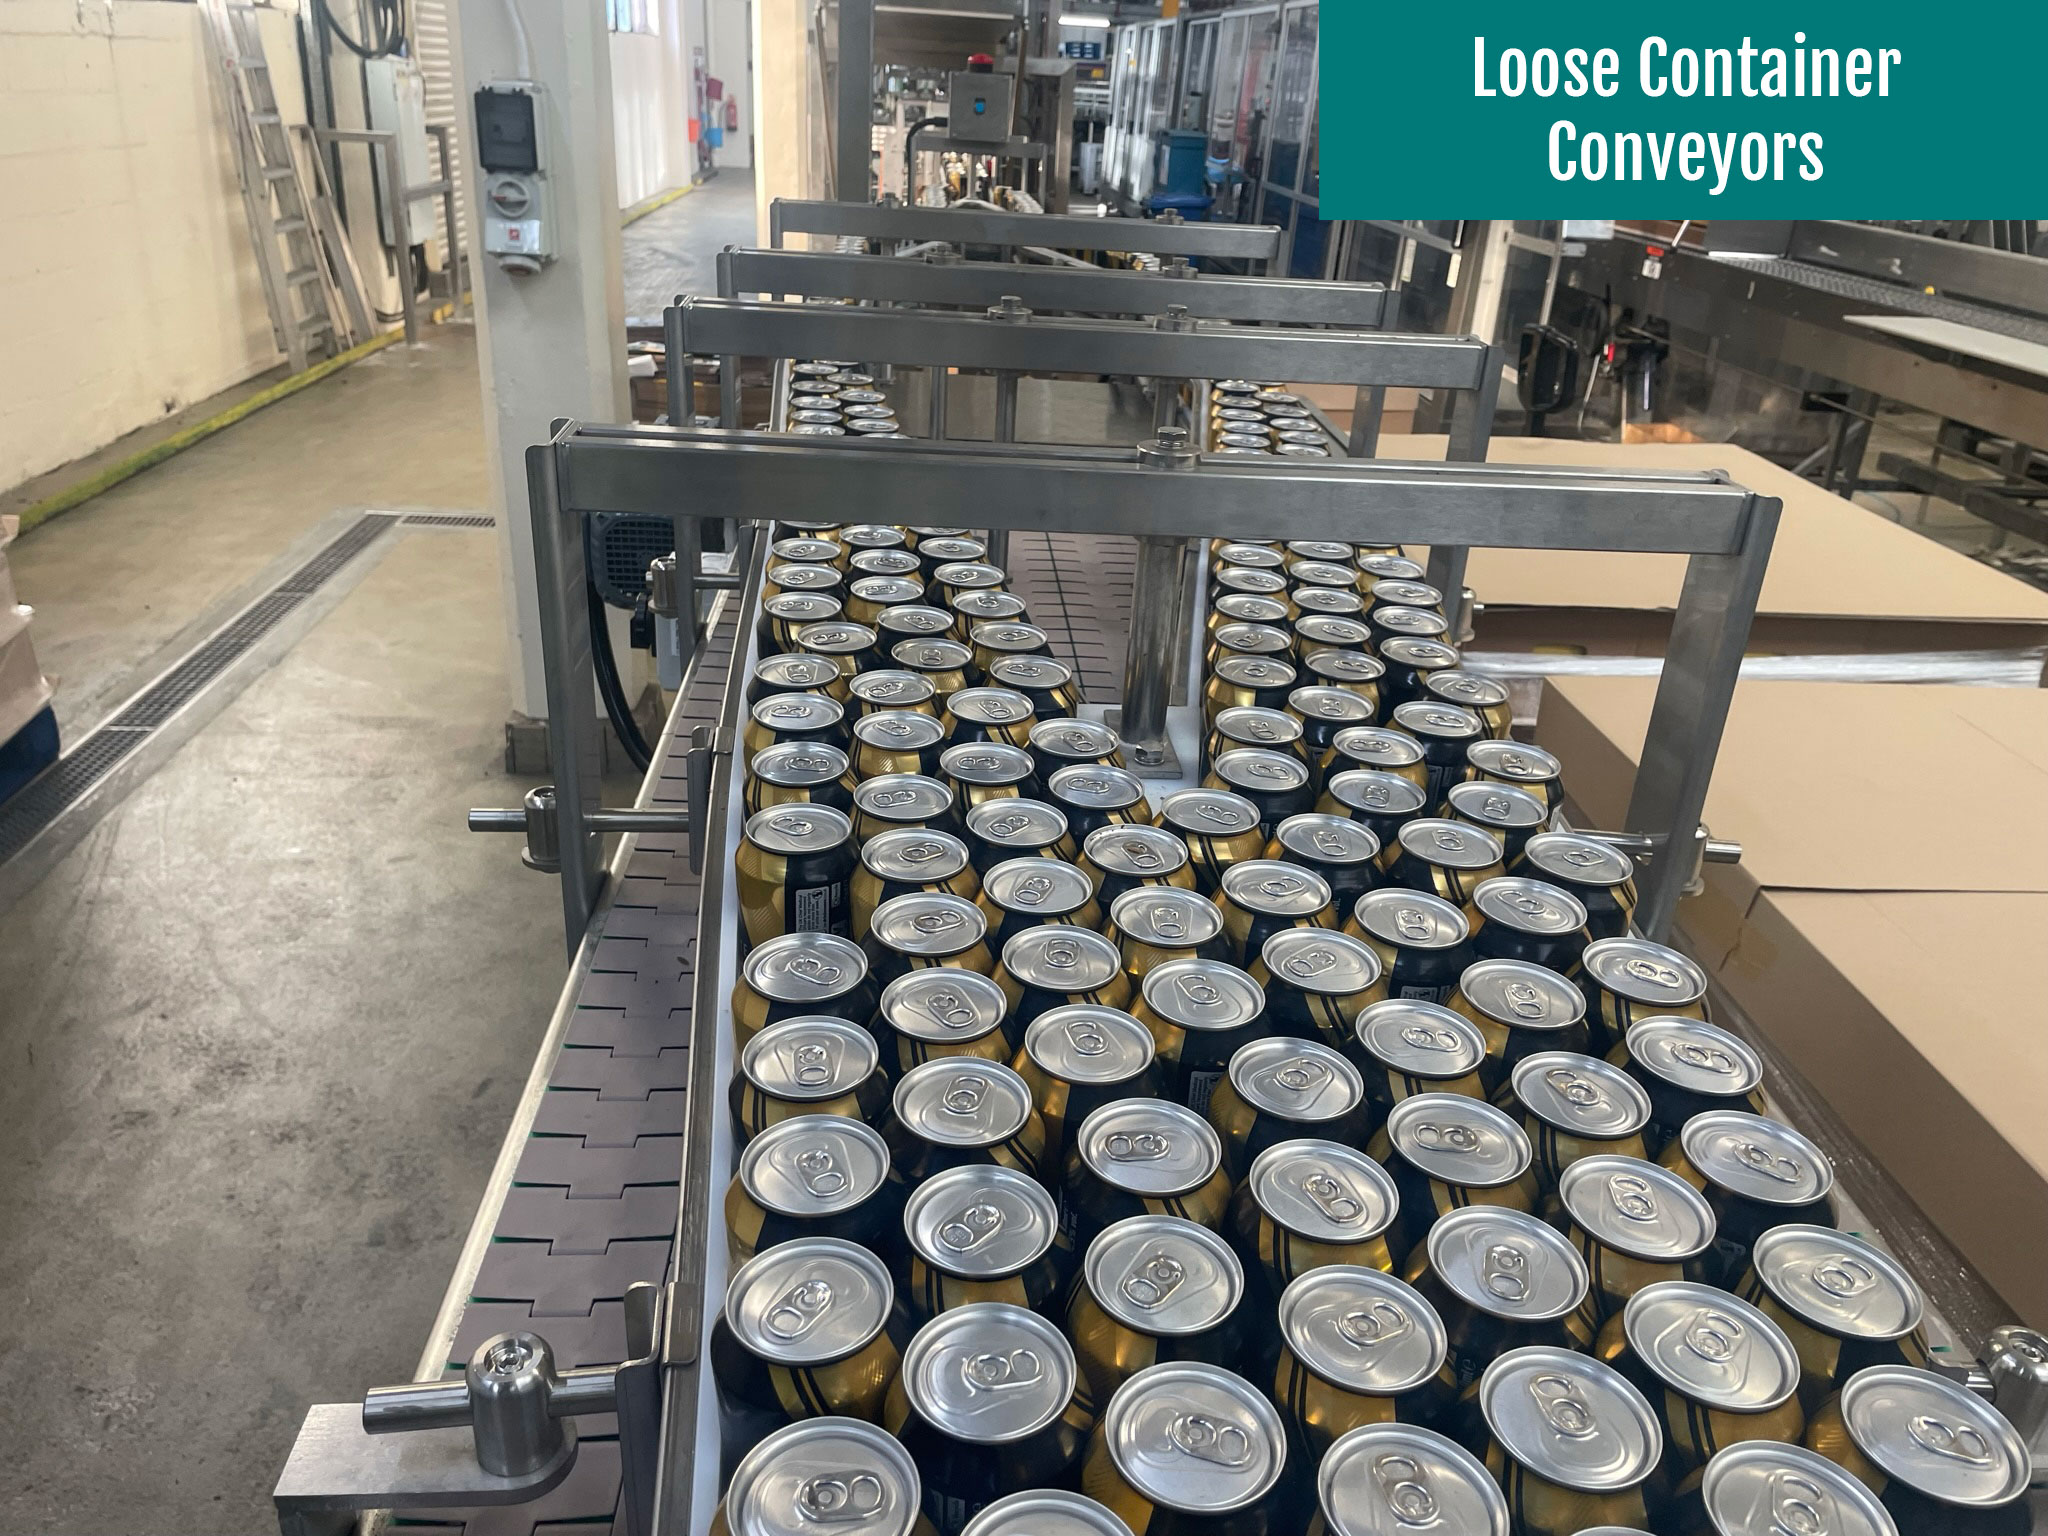 loose container conveyor systems